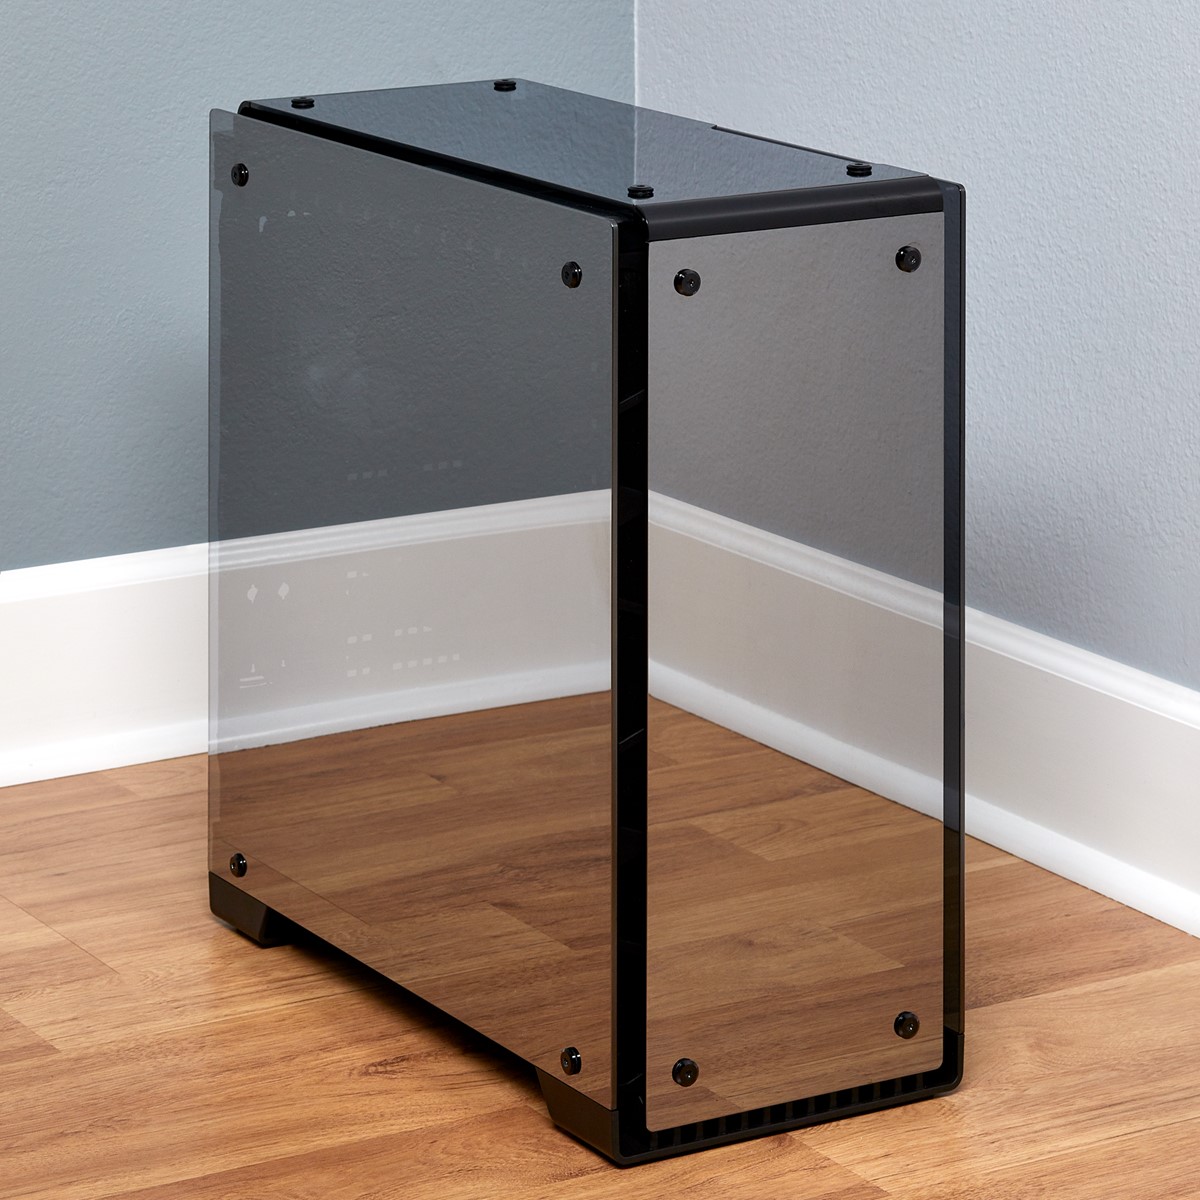 Stylish Mirrored Tempered-Glass Case Is $60 Off | Tom's Hardware